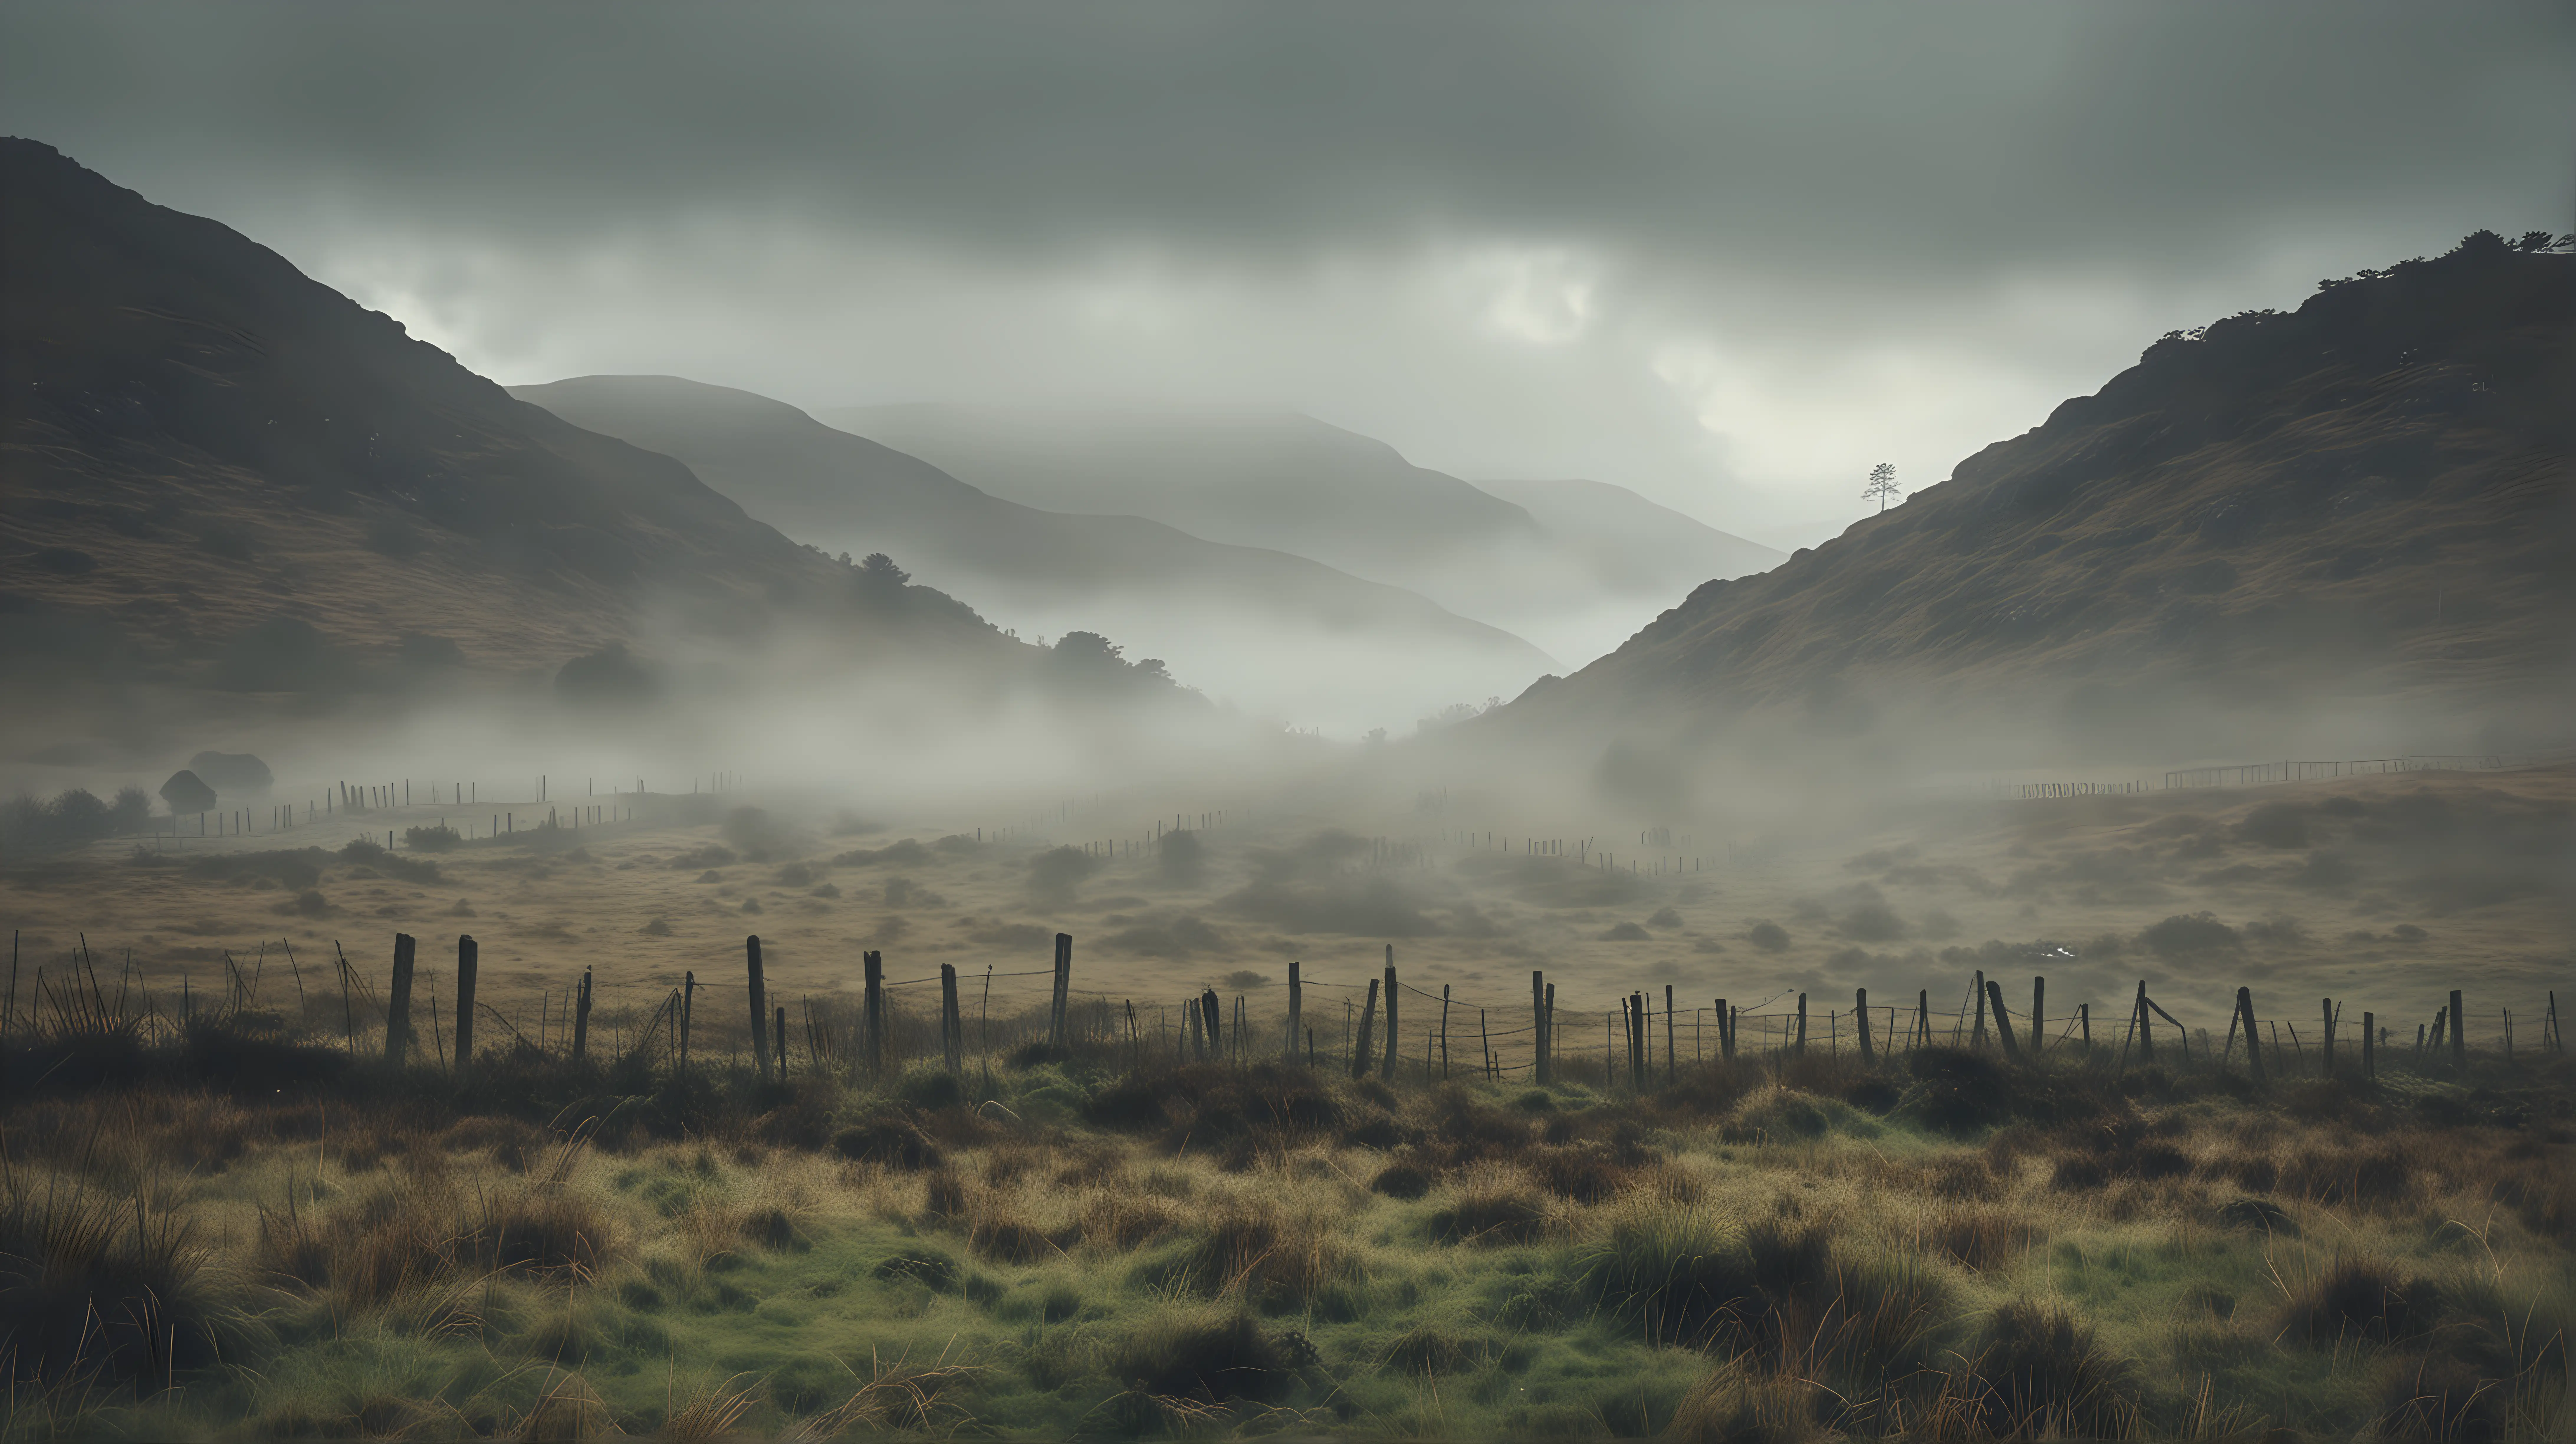 "I'm creating a lookbook for a mystery thriller movie centered around Detective Sergeant Cora Lear. The first image should capture the eerie, mist-covered landscape of rural Scotland, setting the stage for a tale of murder, secrets, and betrayal. 
